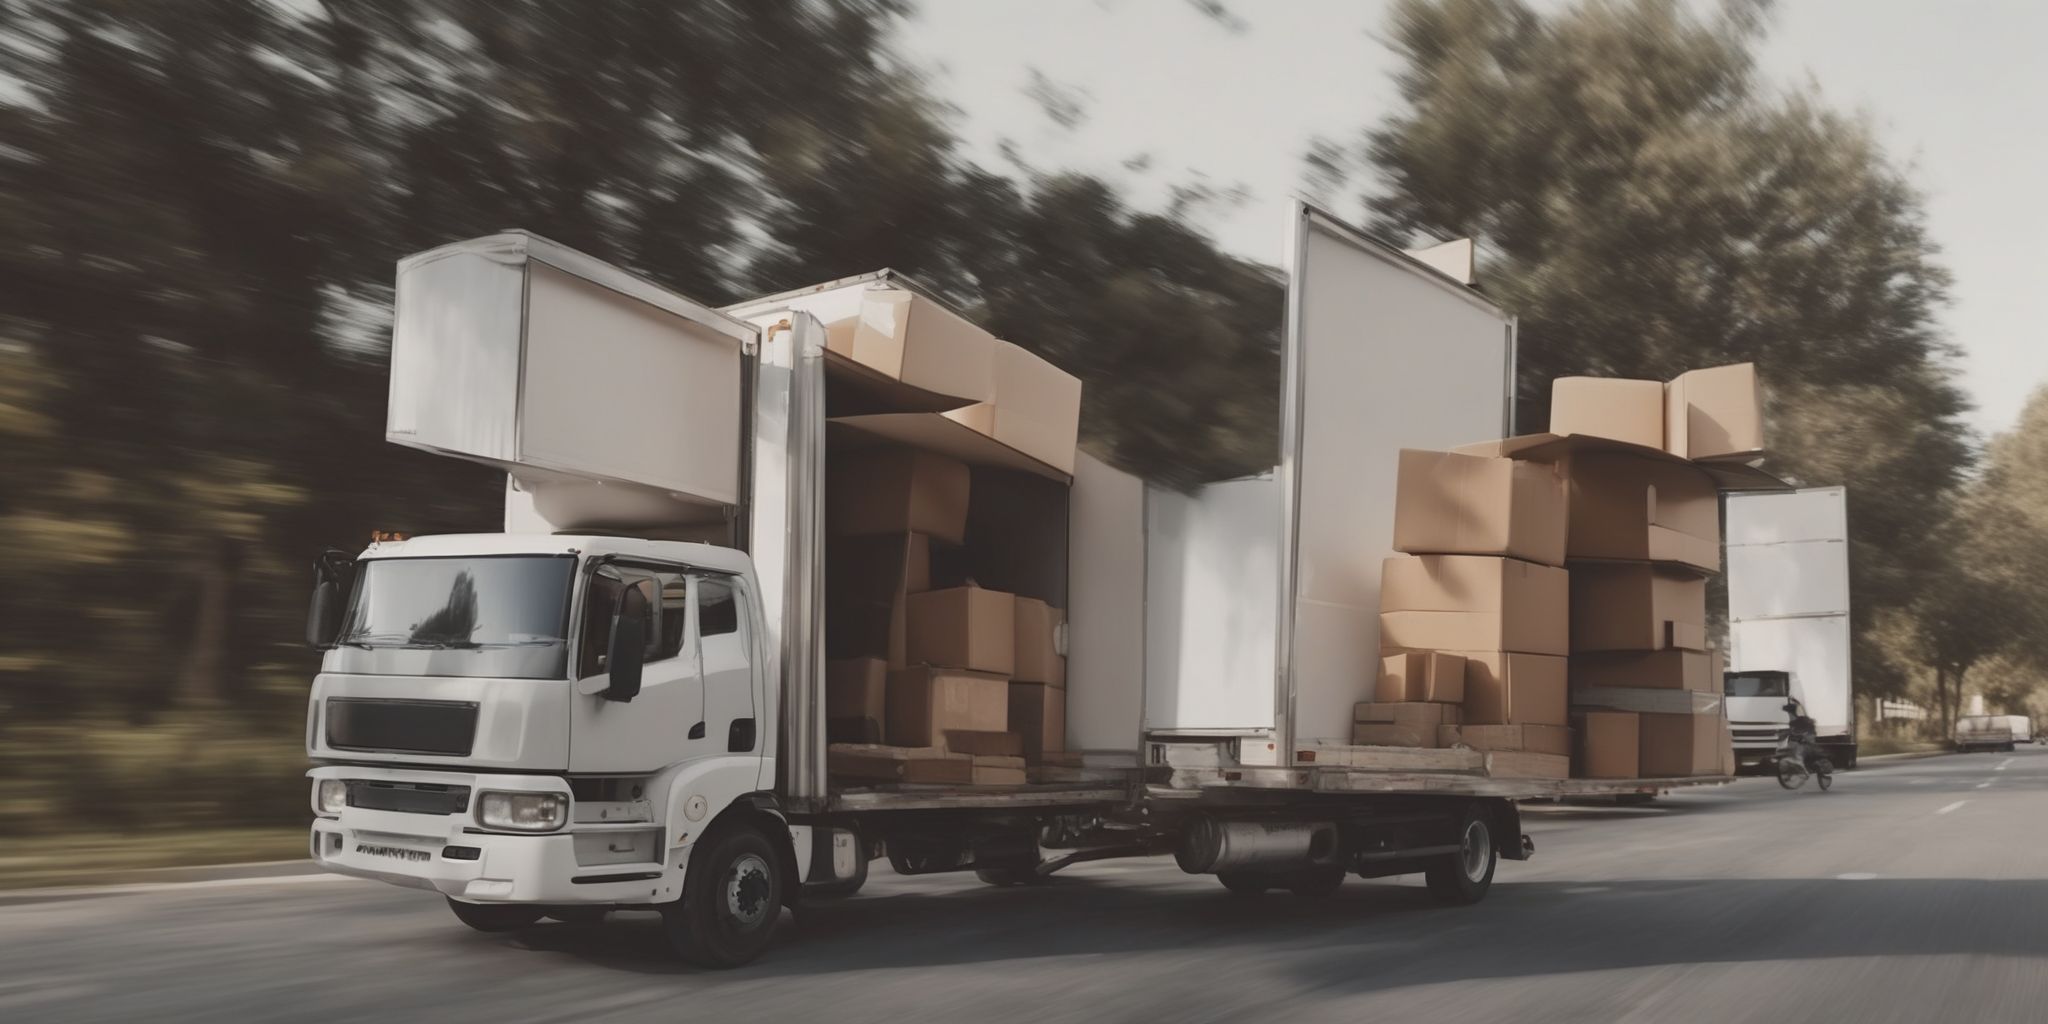 Moving truck  in realistic, photographic style